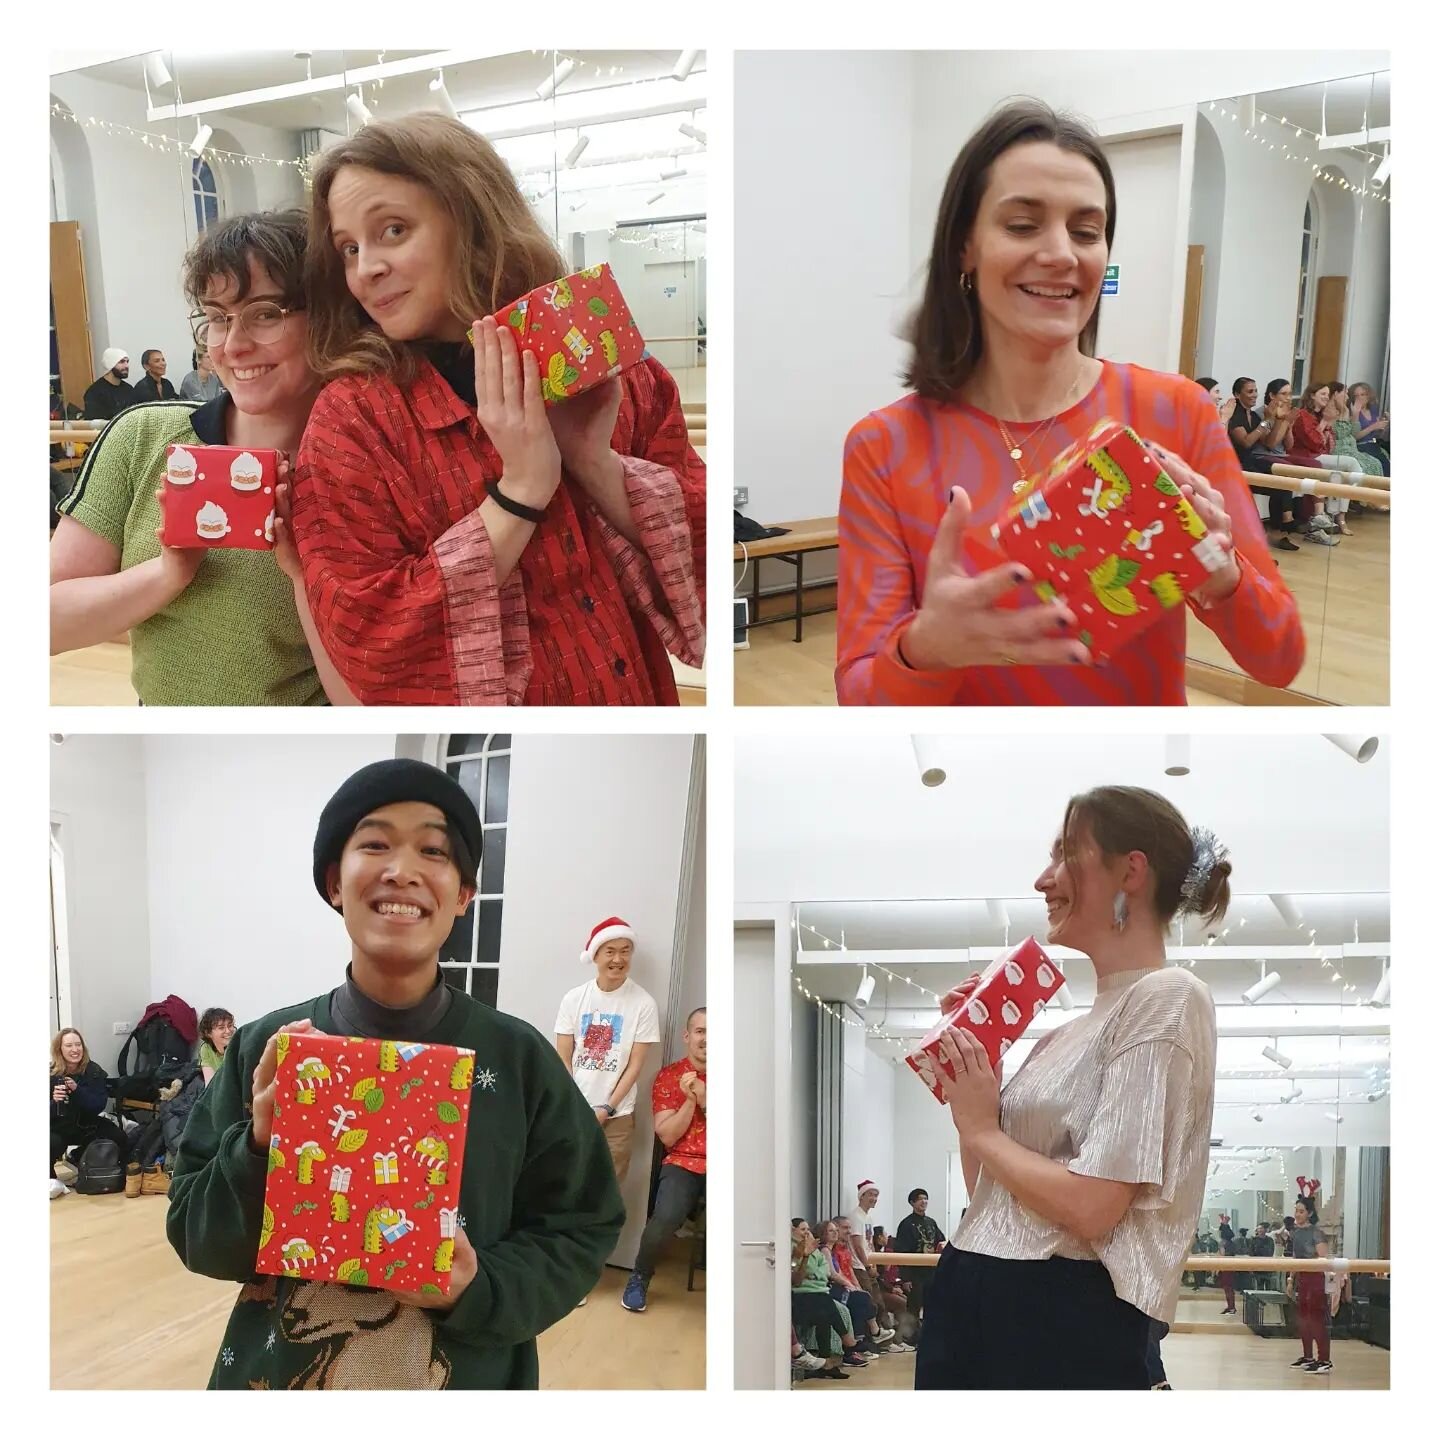 Christmas Special 2022 with a class by @yeetingliu (assisted by @michael_fox_official), hustle games, best-dressed prize and of course festive social-dancing! Thank you all for the good vibes 🎄😊 

Prize winners 🎁
Musical statues: @tessa_morgan &am